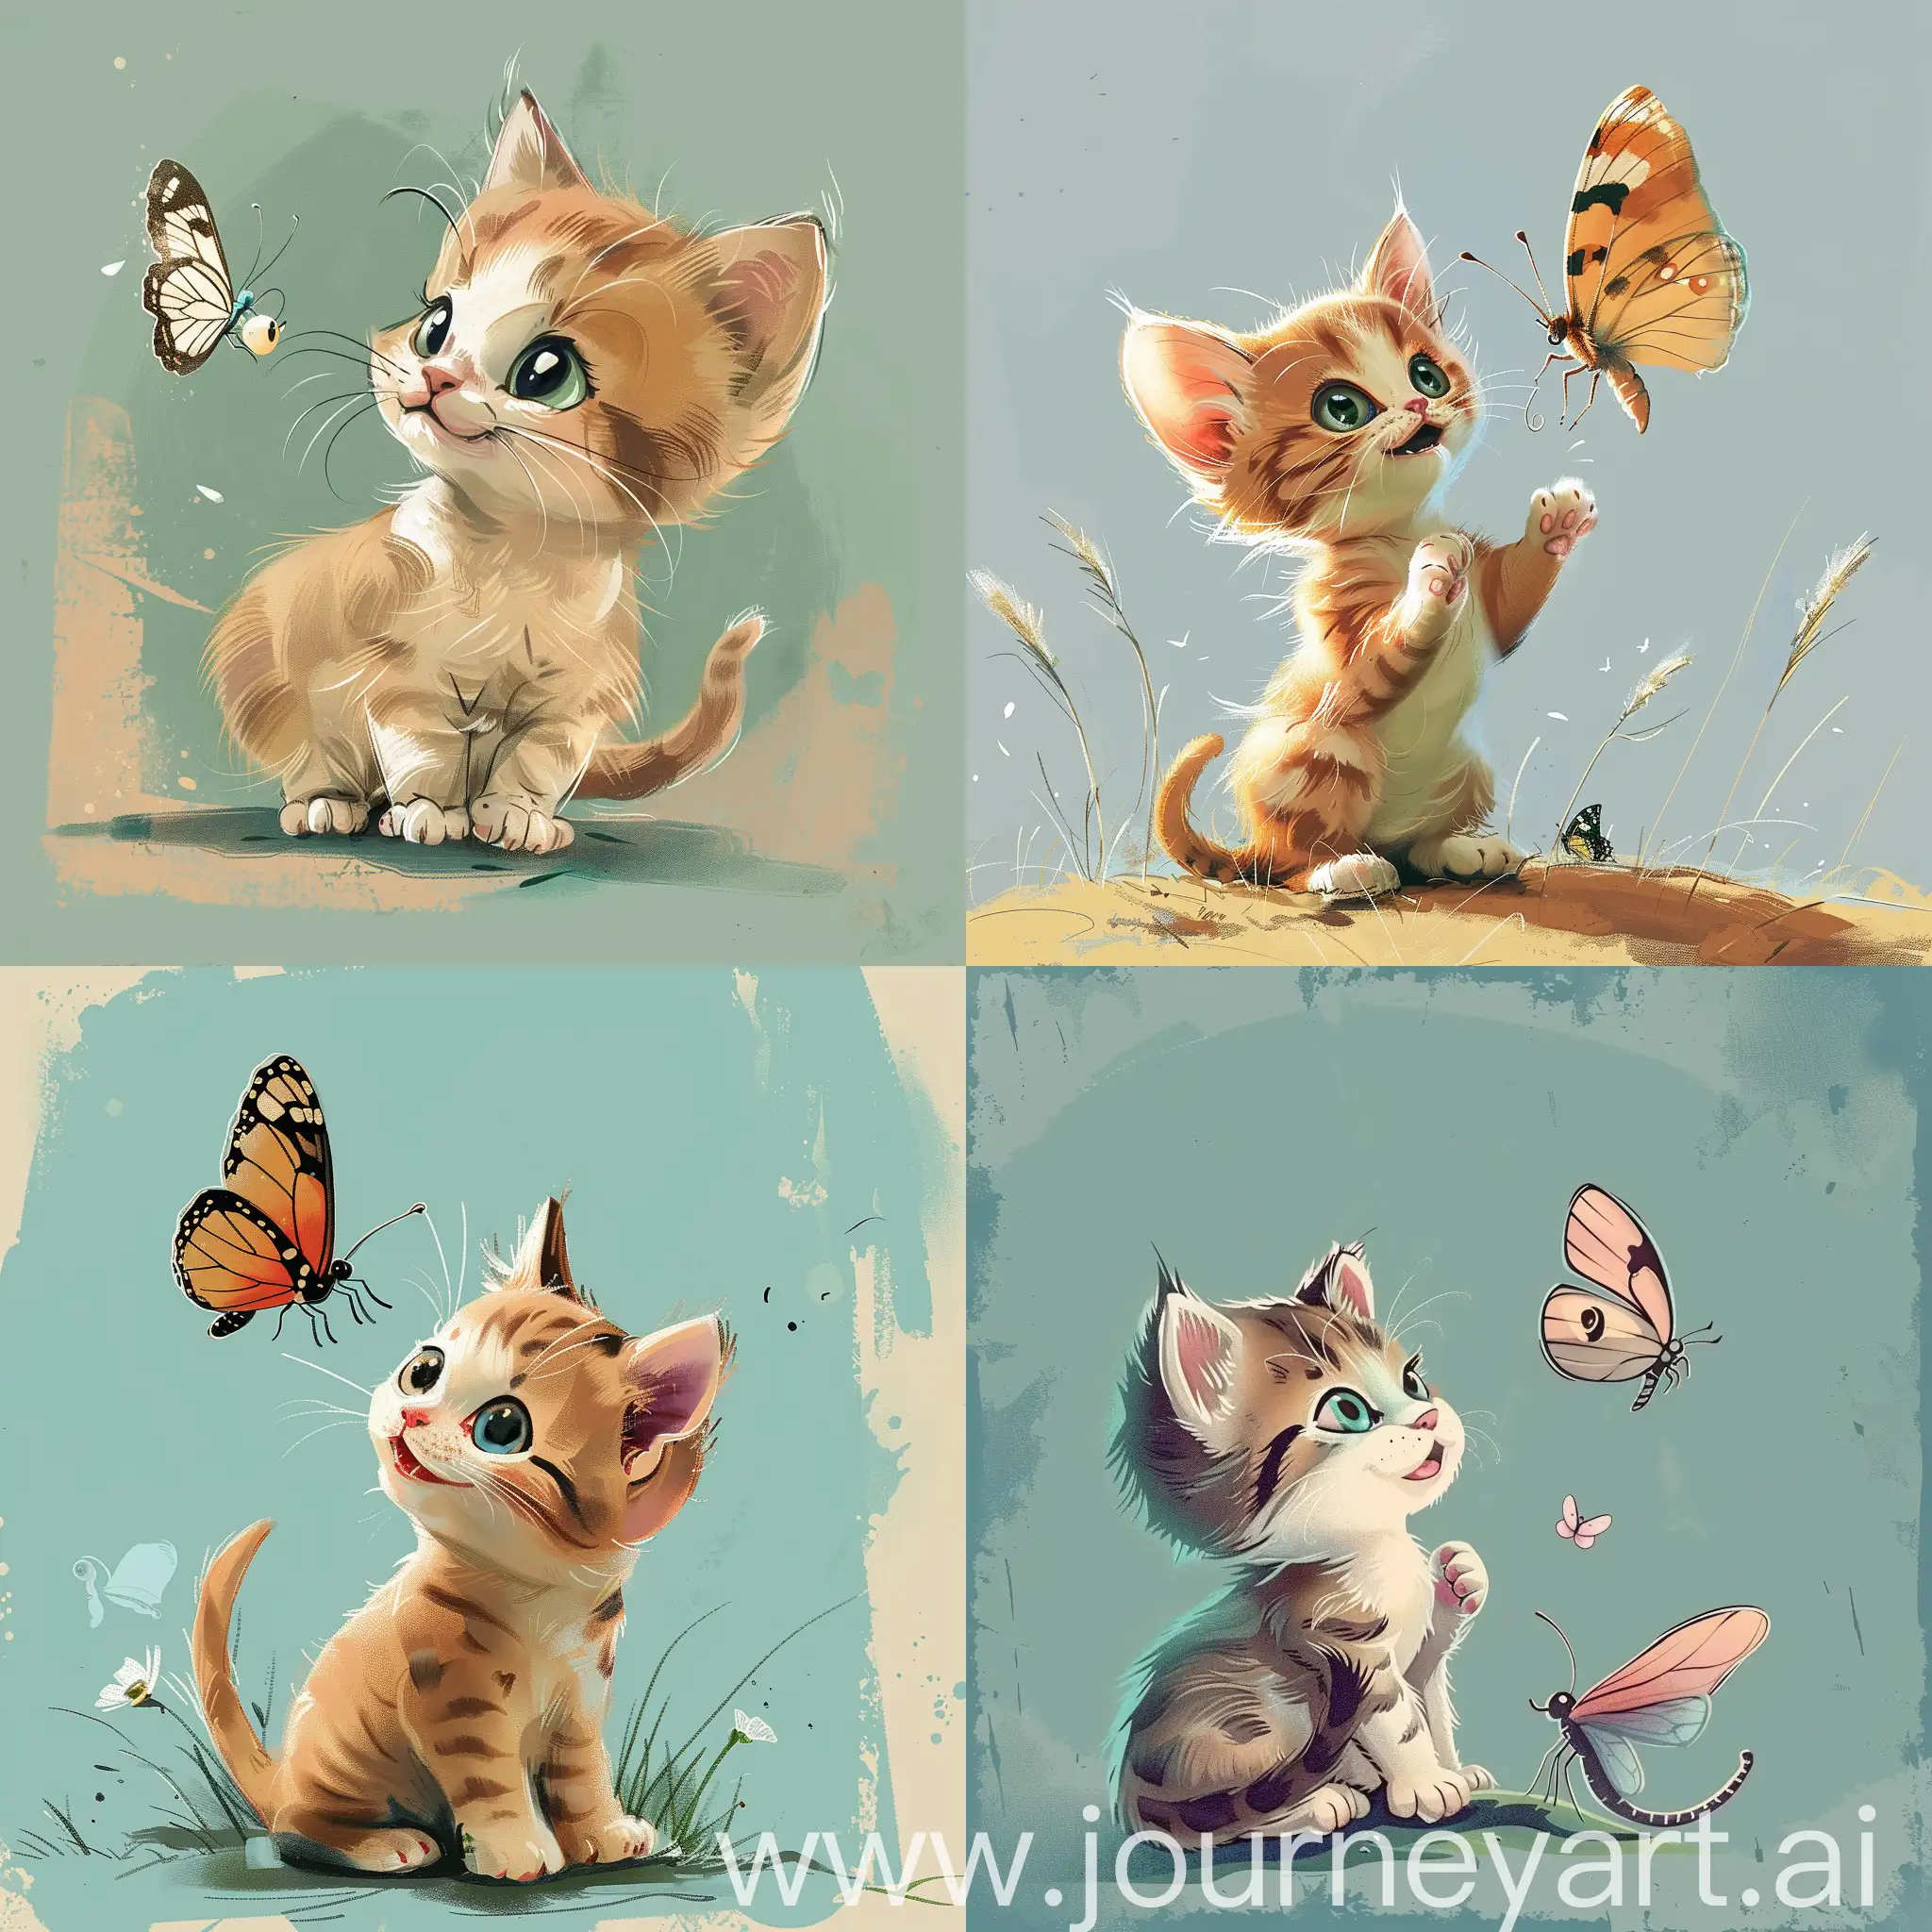 a kitten and a butterfly, cartoon style